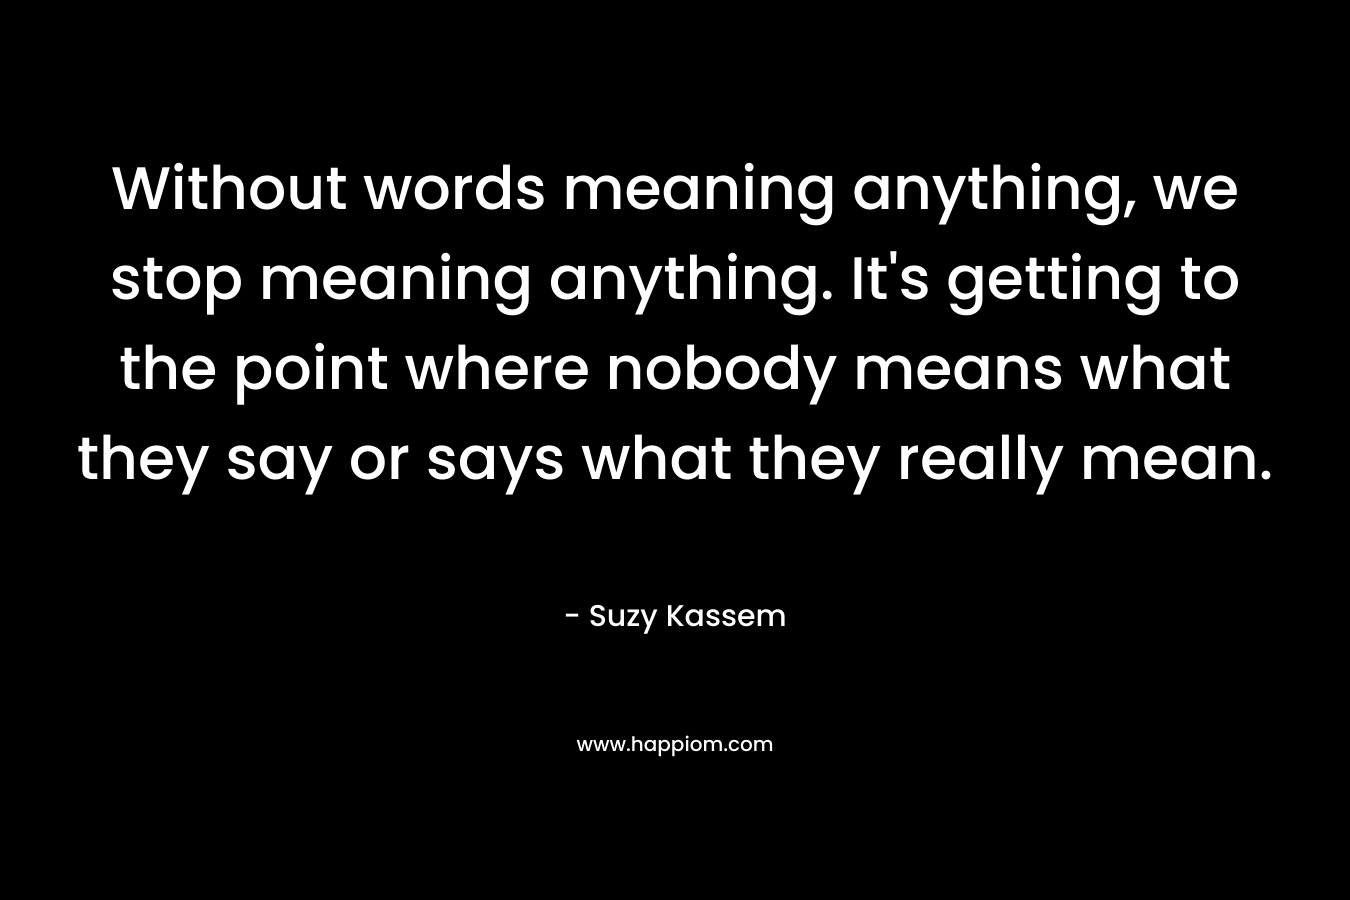 Without words meaning anything, we stop meaning anything. It's getting to the point where nobody means what they say or says what they really mean.